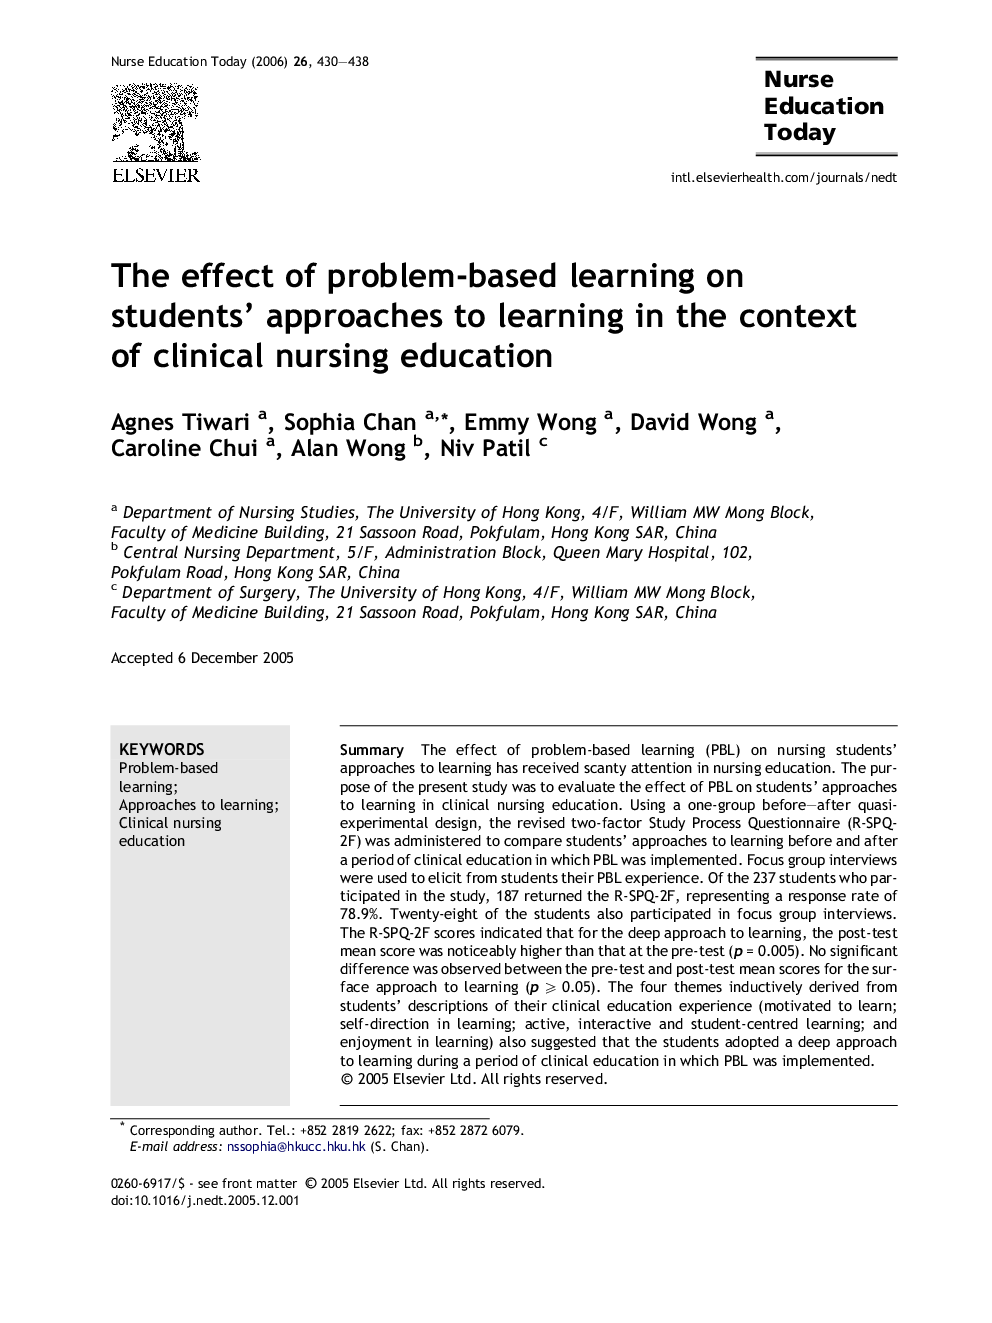 The effect of problem-based learning on students’ approaches to learning in the context of clinical nursing education